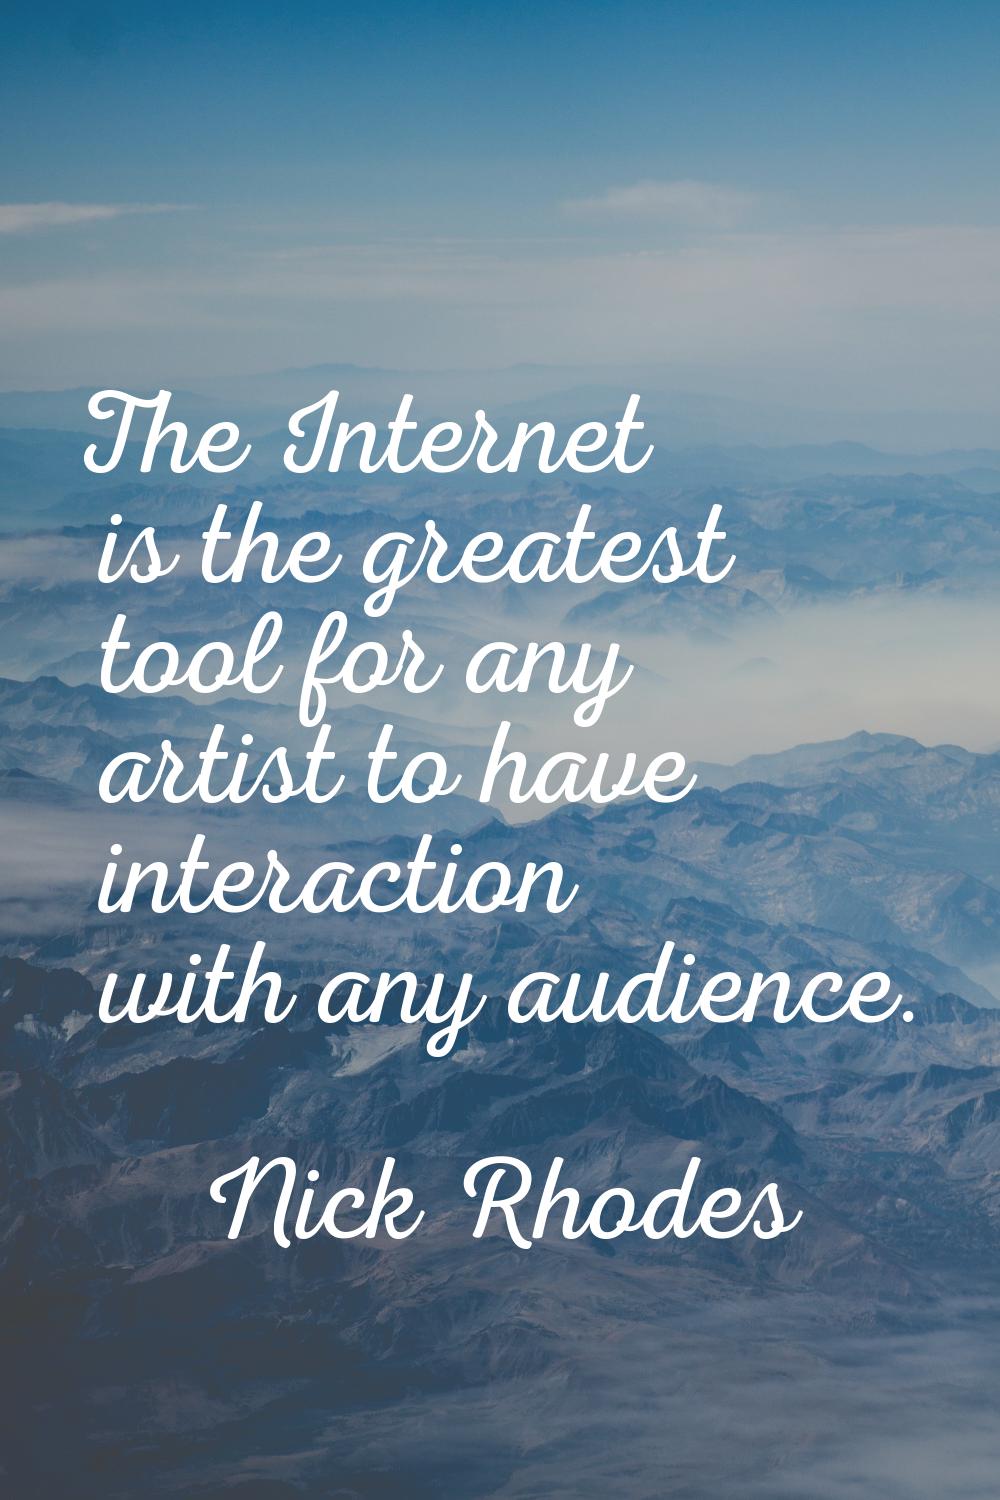 The Internet is the greatest tool for any artist to have interaction with any audience.